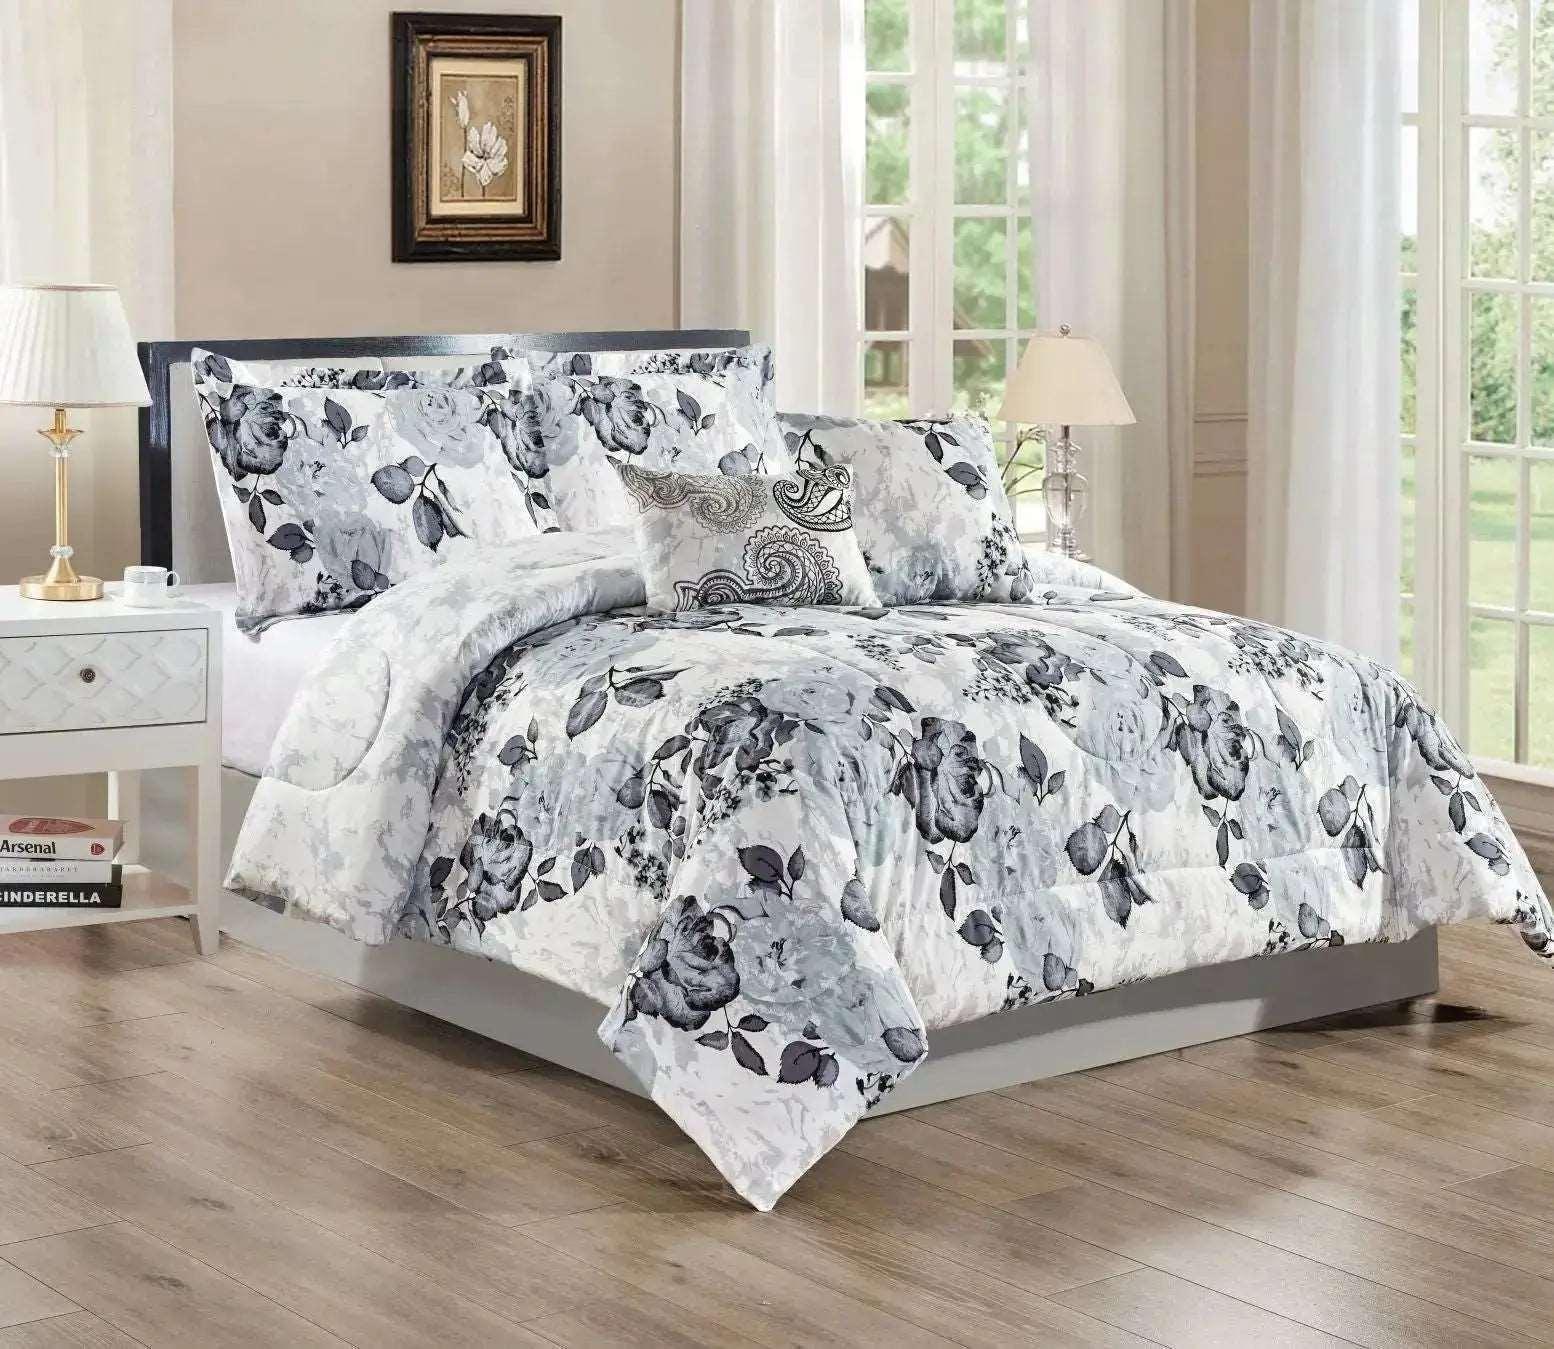 Linen World 7 PC Oversized Comforter Set in King and Queen